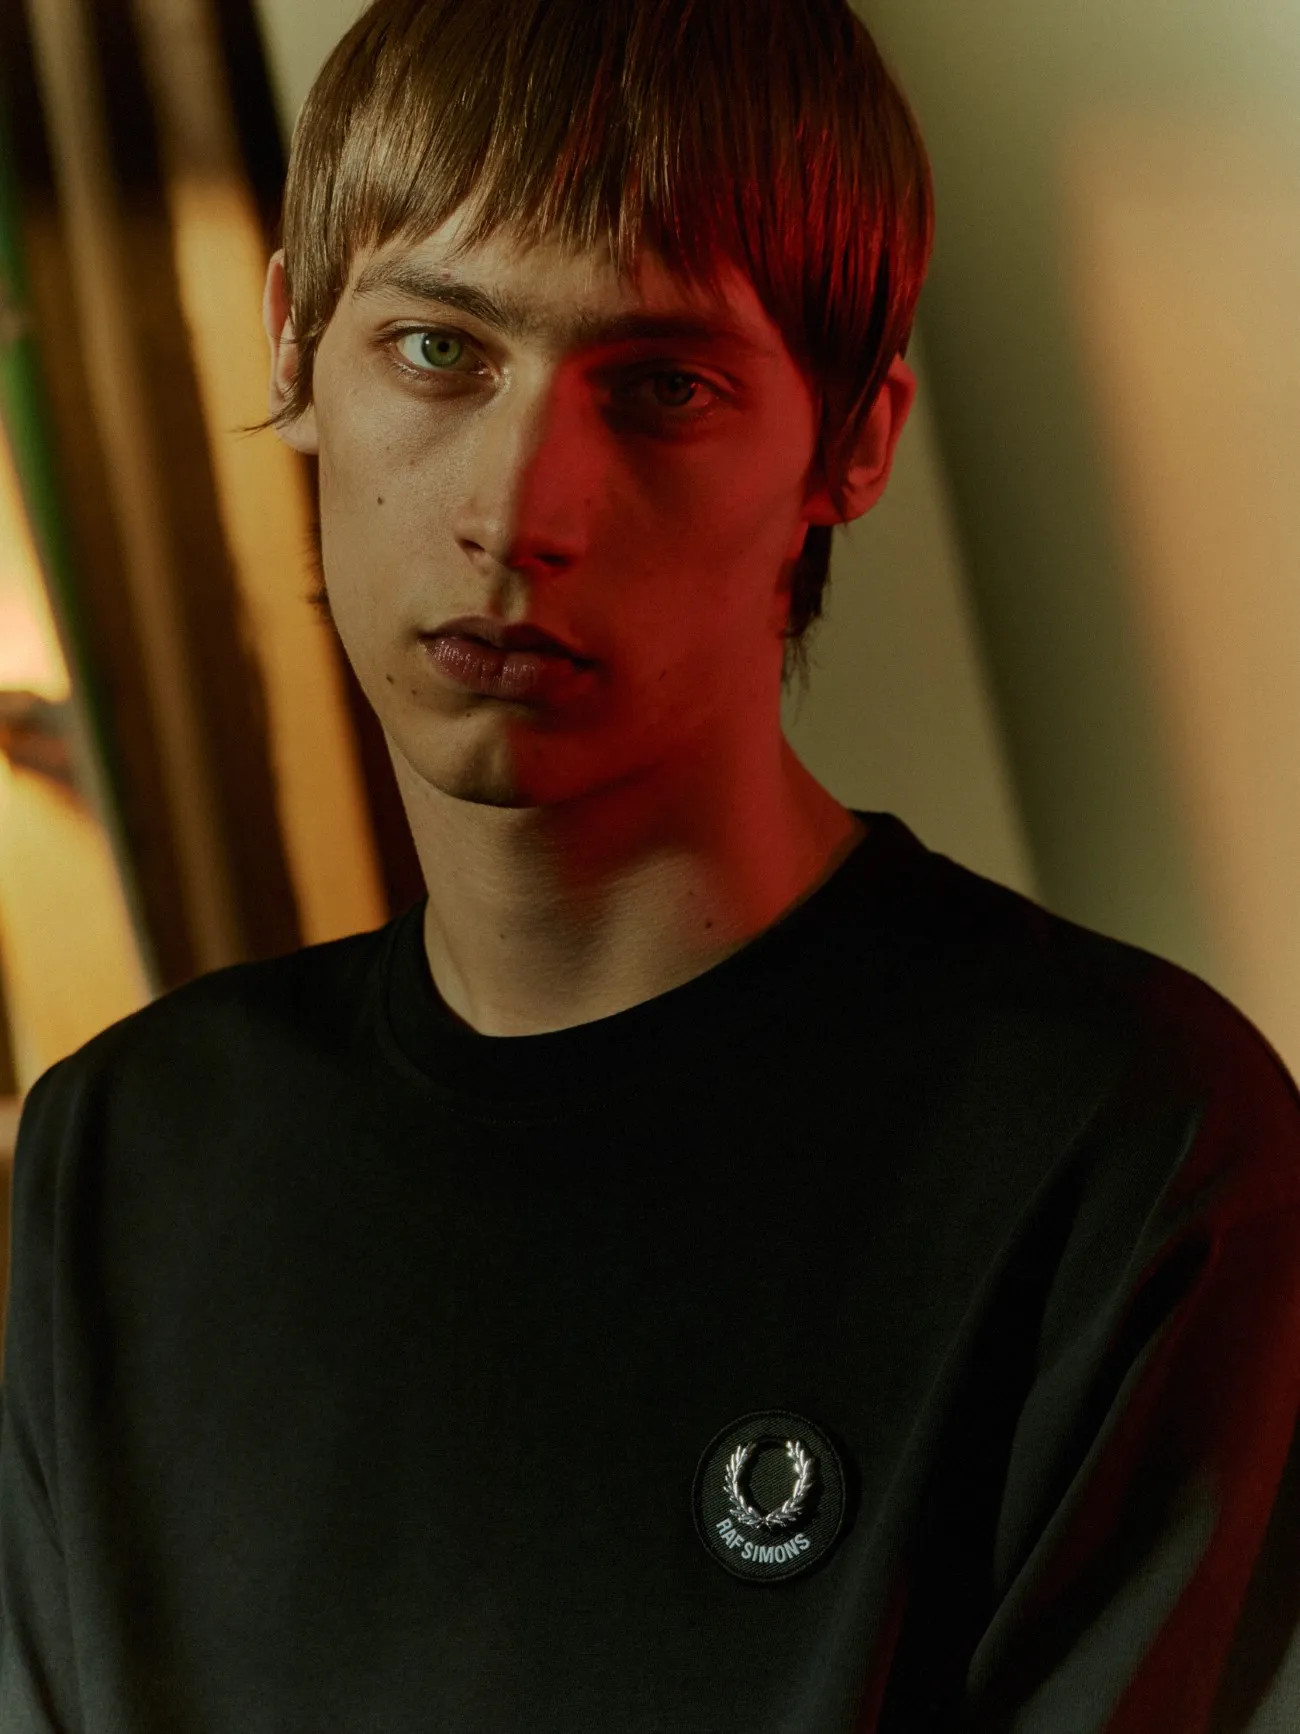 Fred Perry x Raf Simon - Northern Soul Collection